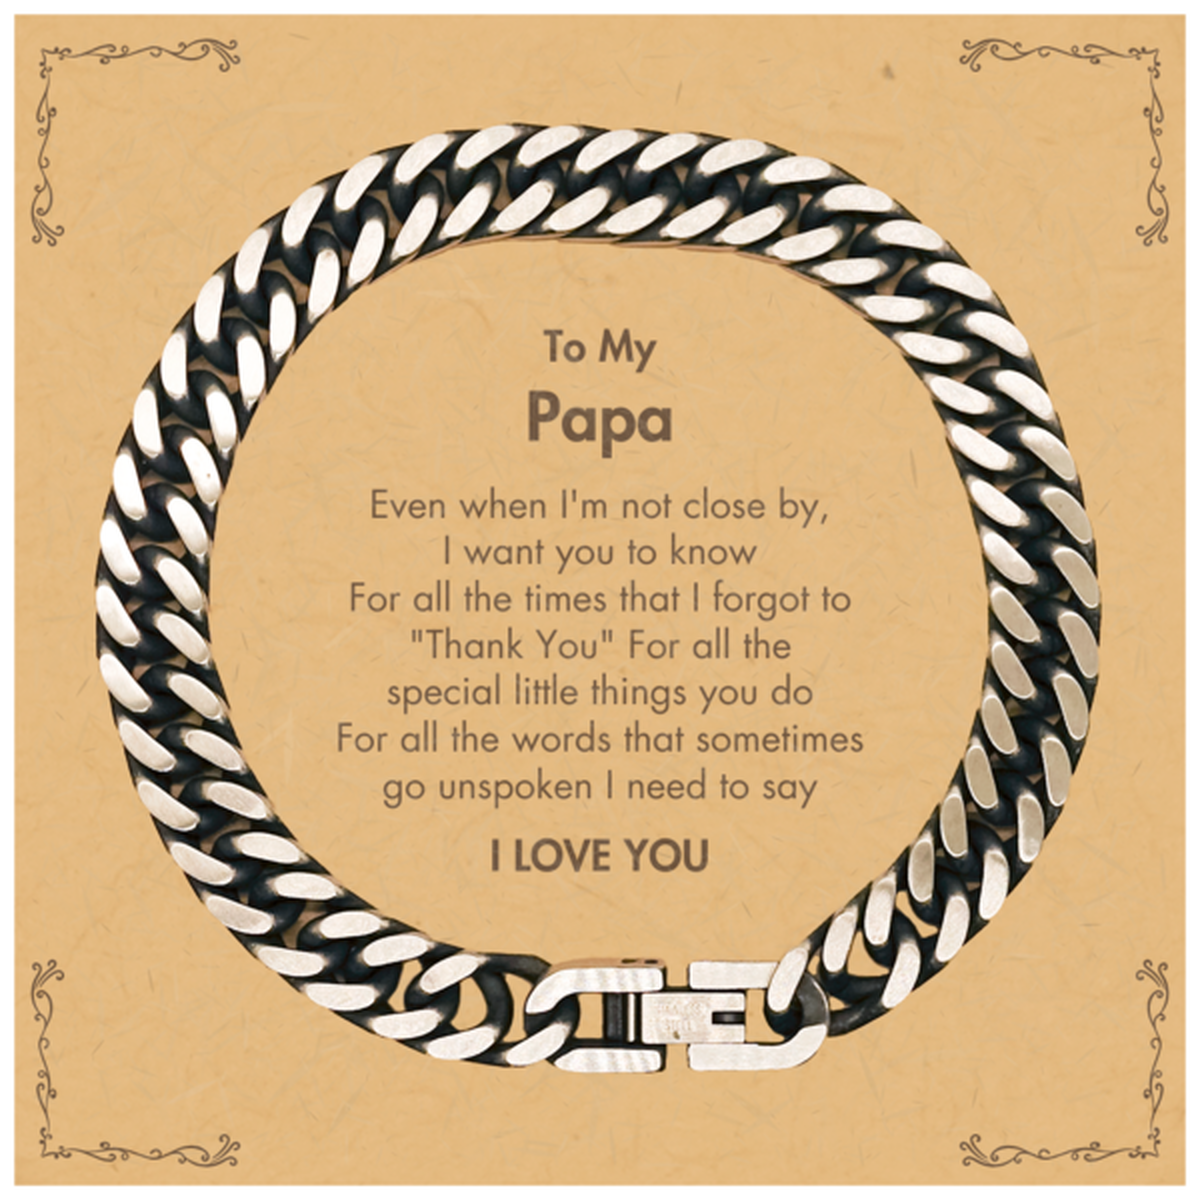 Thank You Gifts for Papa, Keepsake Cuban Link Chain Bracelet Gifts for Papa Birthday Mother's day Father's Day Papa For all the words That sometimes go unspoken I need to say I LOVE YOU